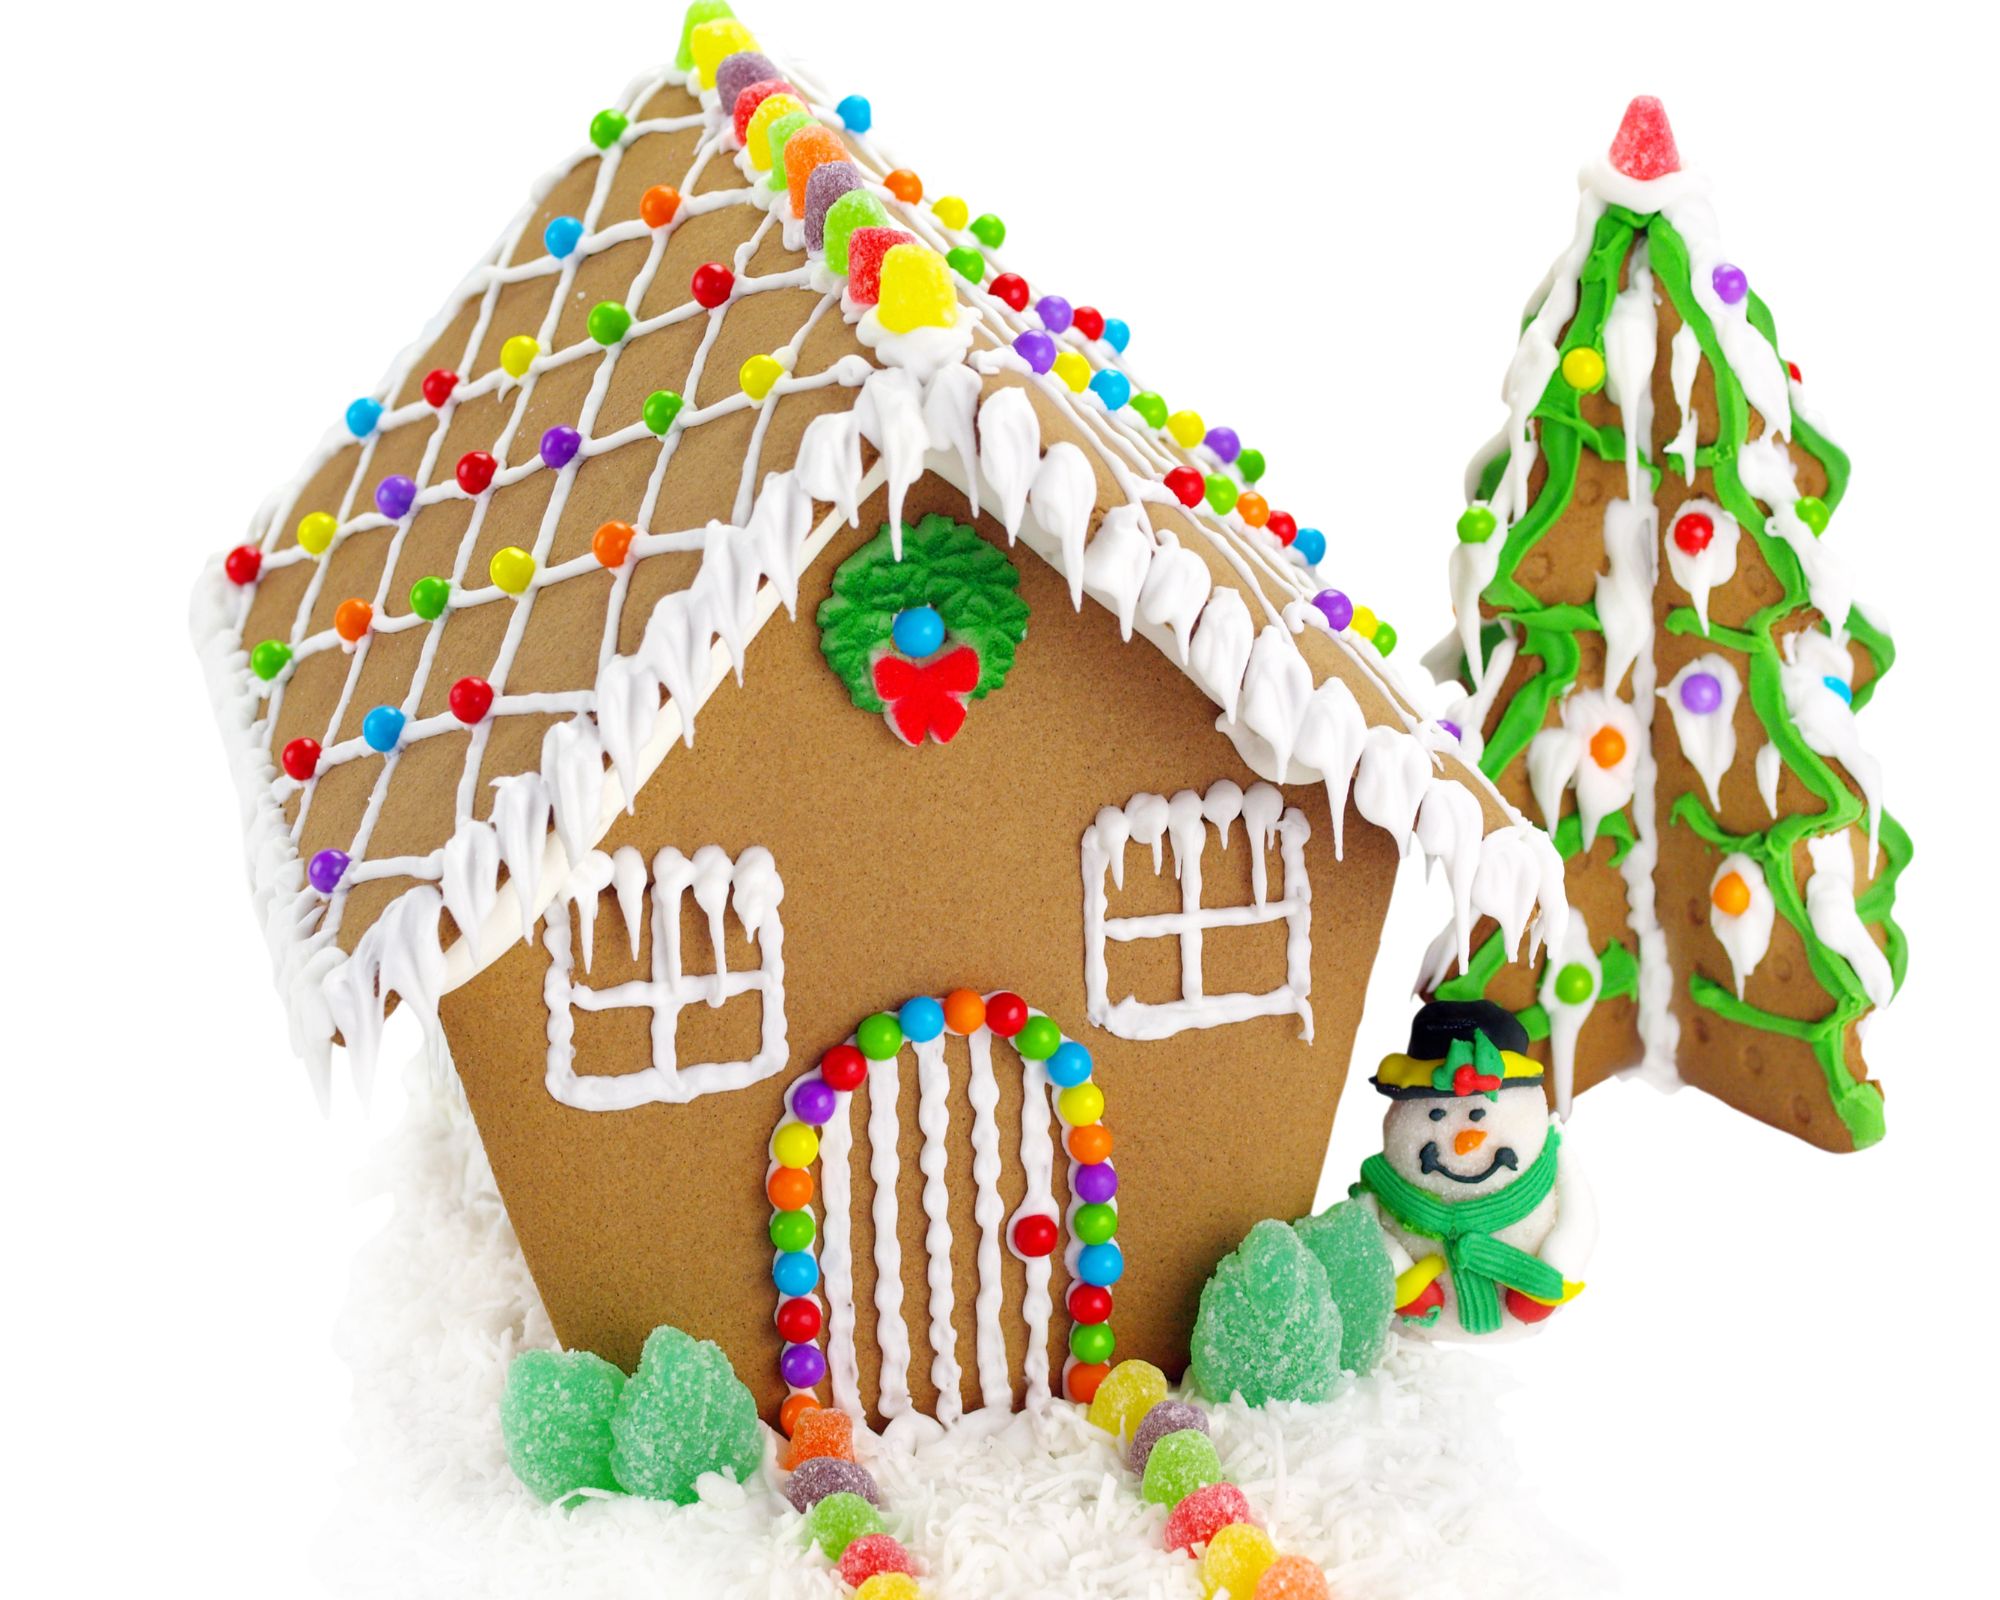 gingerbread house decorated with icing and candy